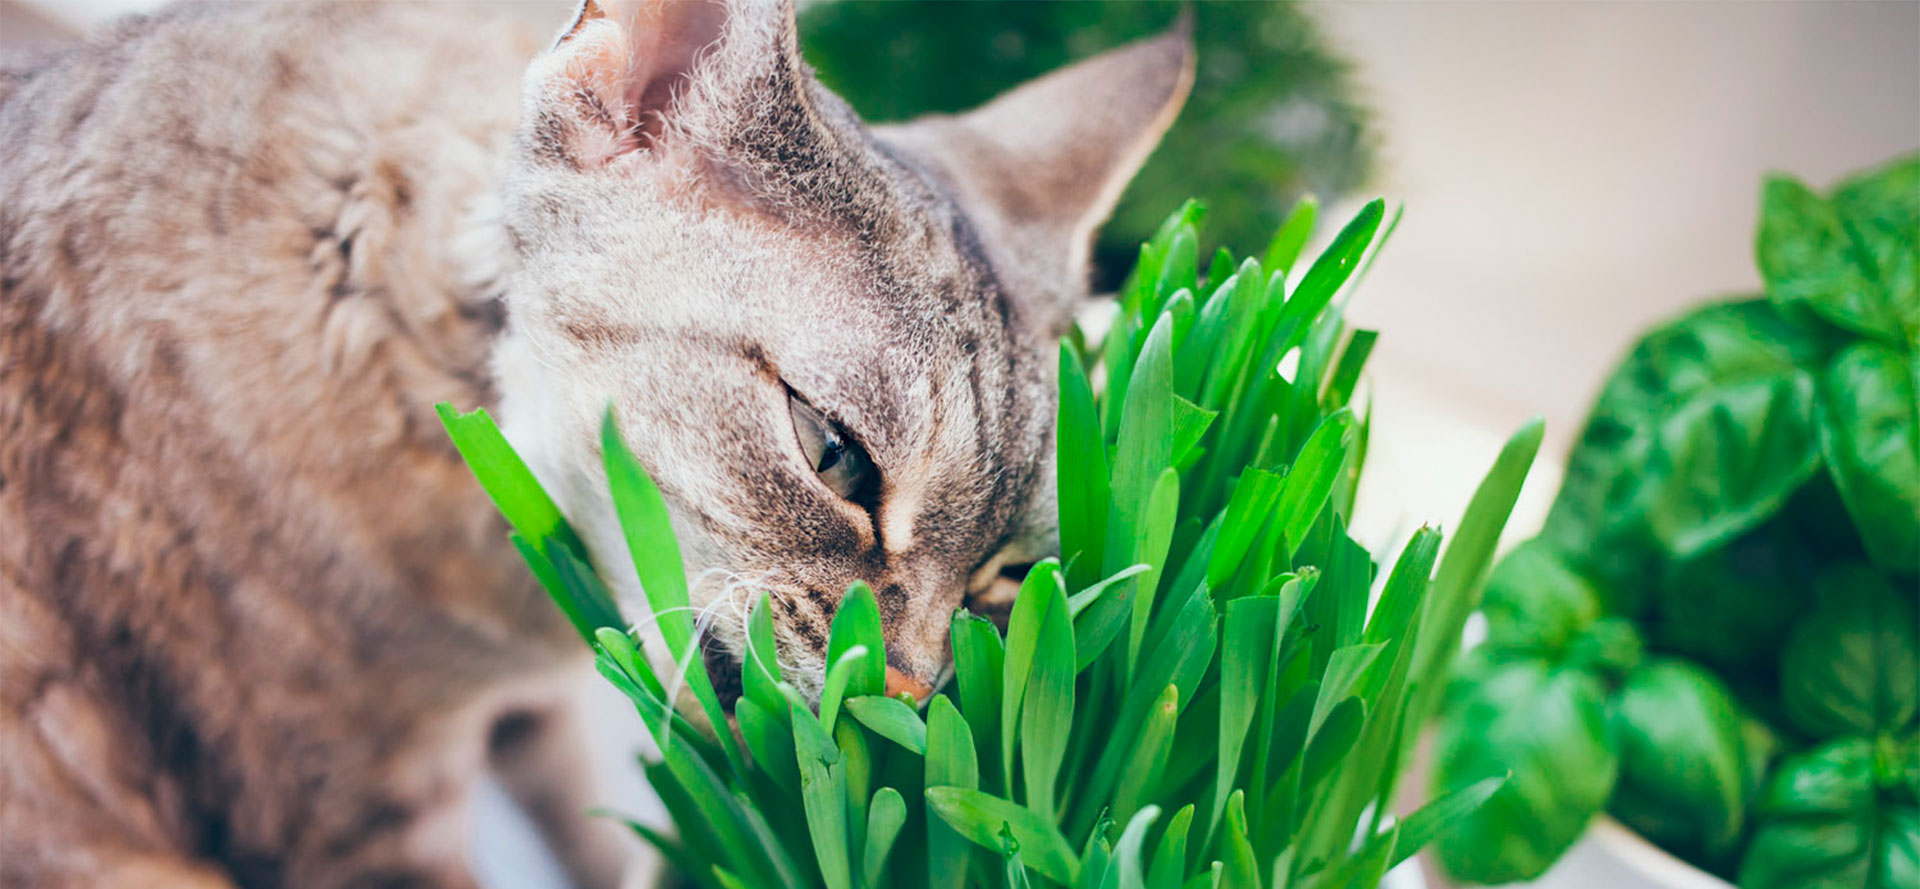 Perfect Grass for Cat.